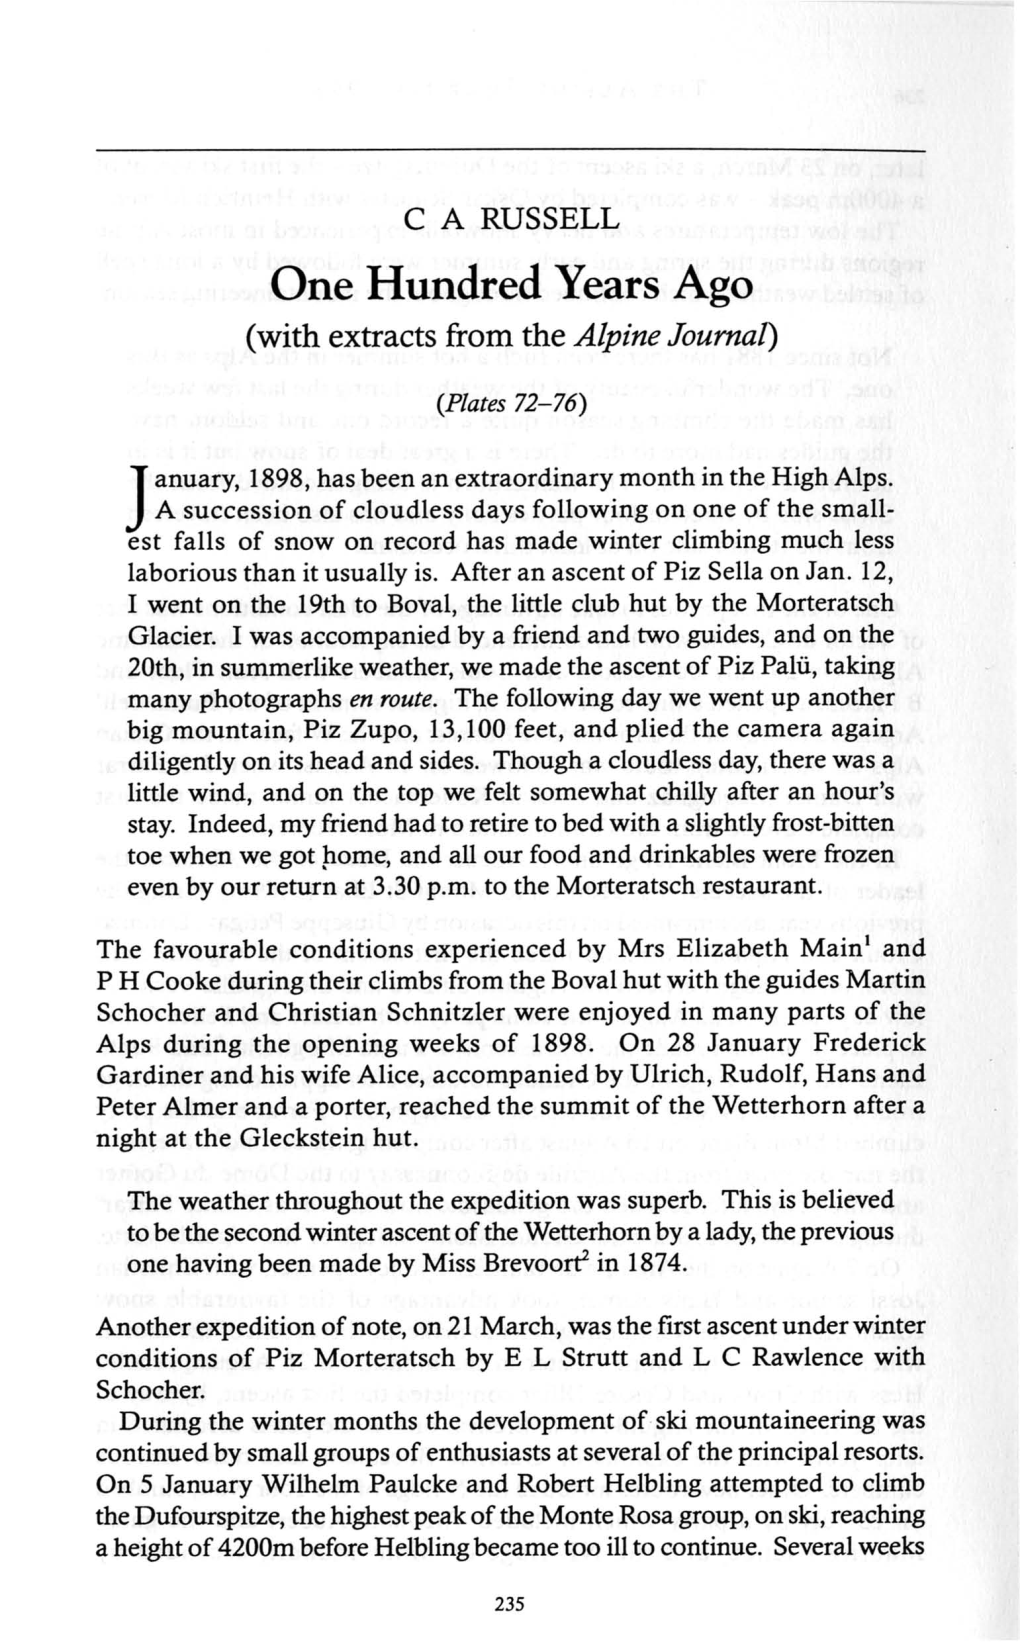 One Hundred Years Ago (With Extracts from the Alpine Journal)